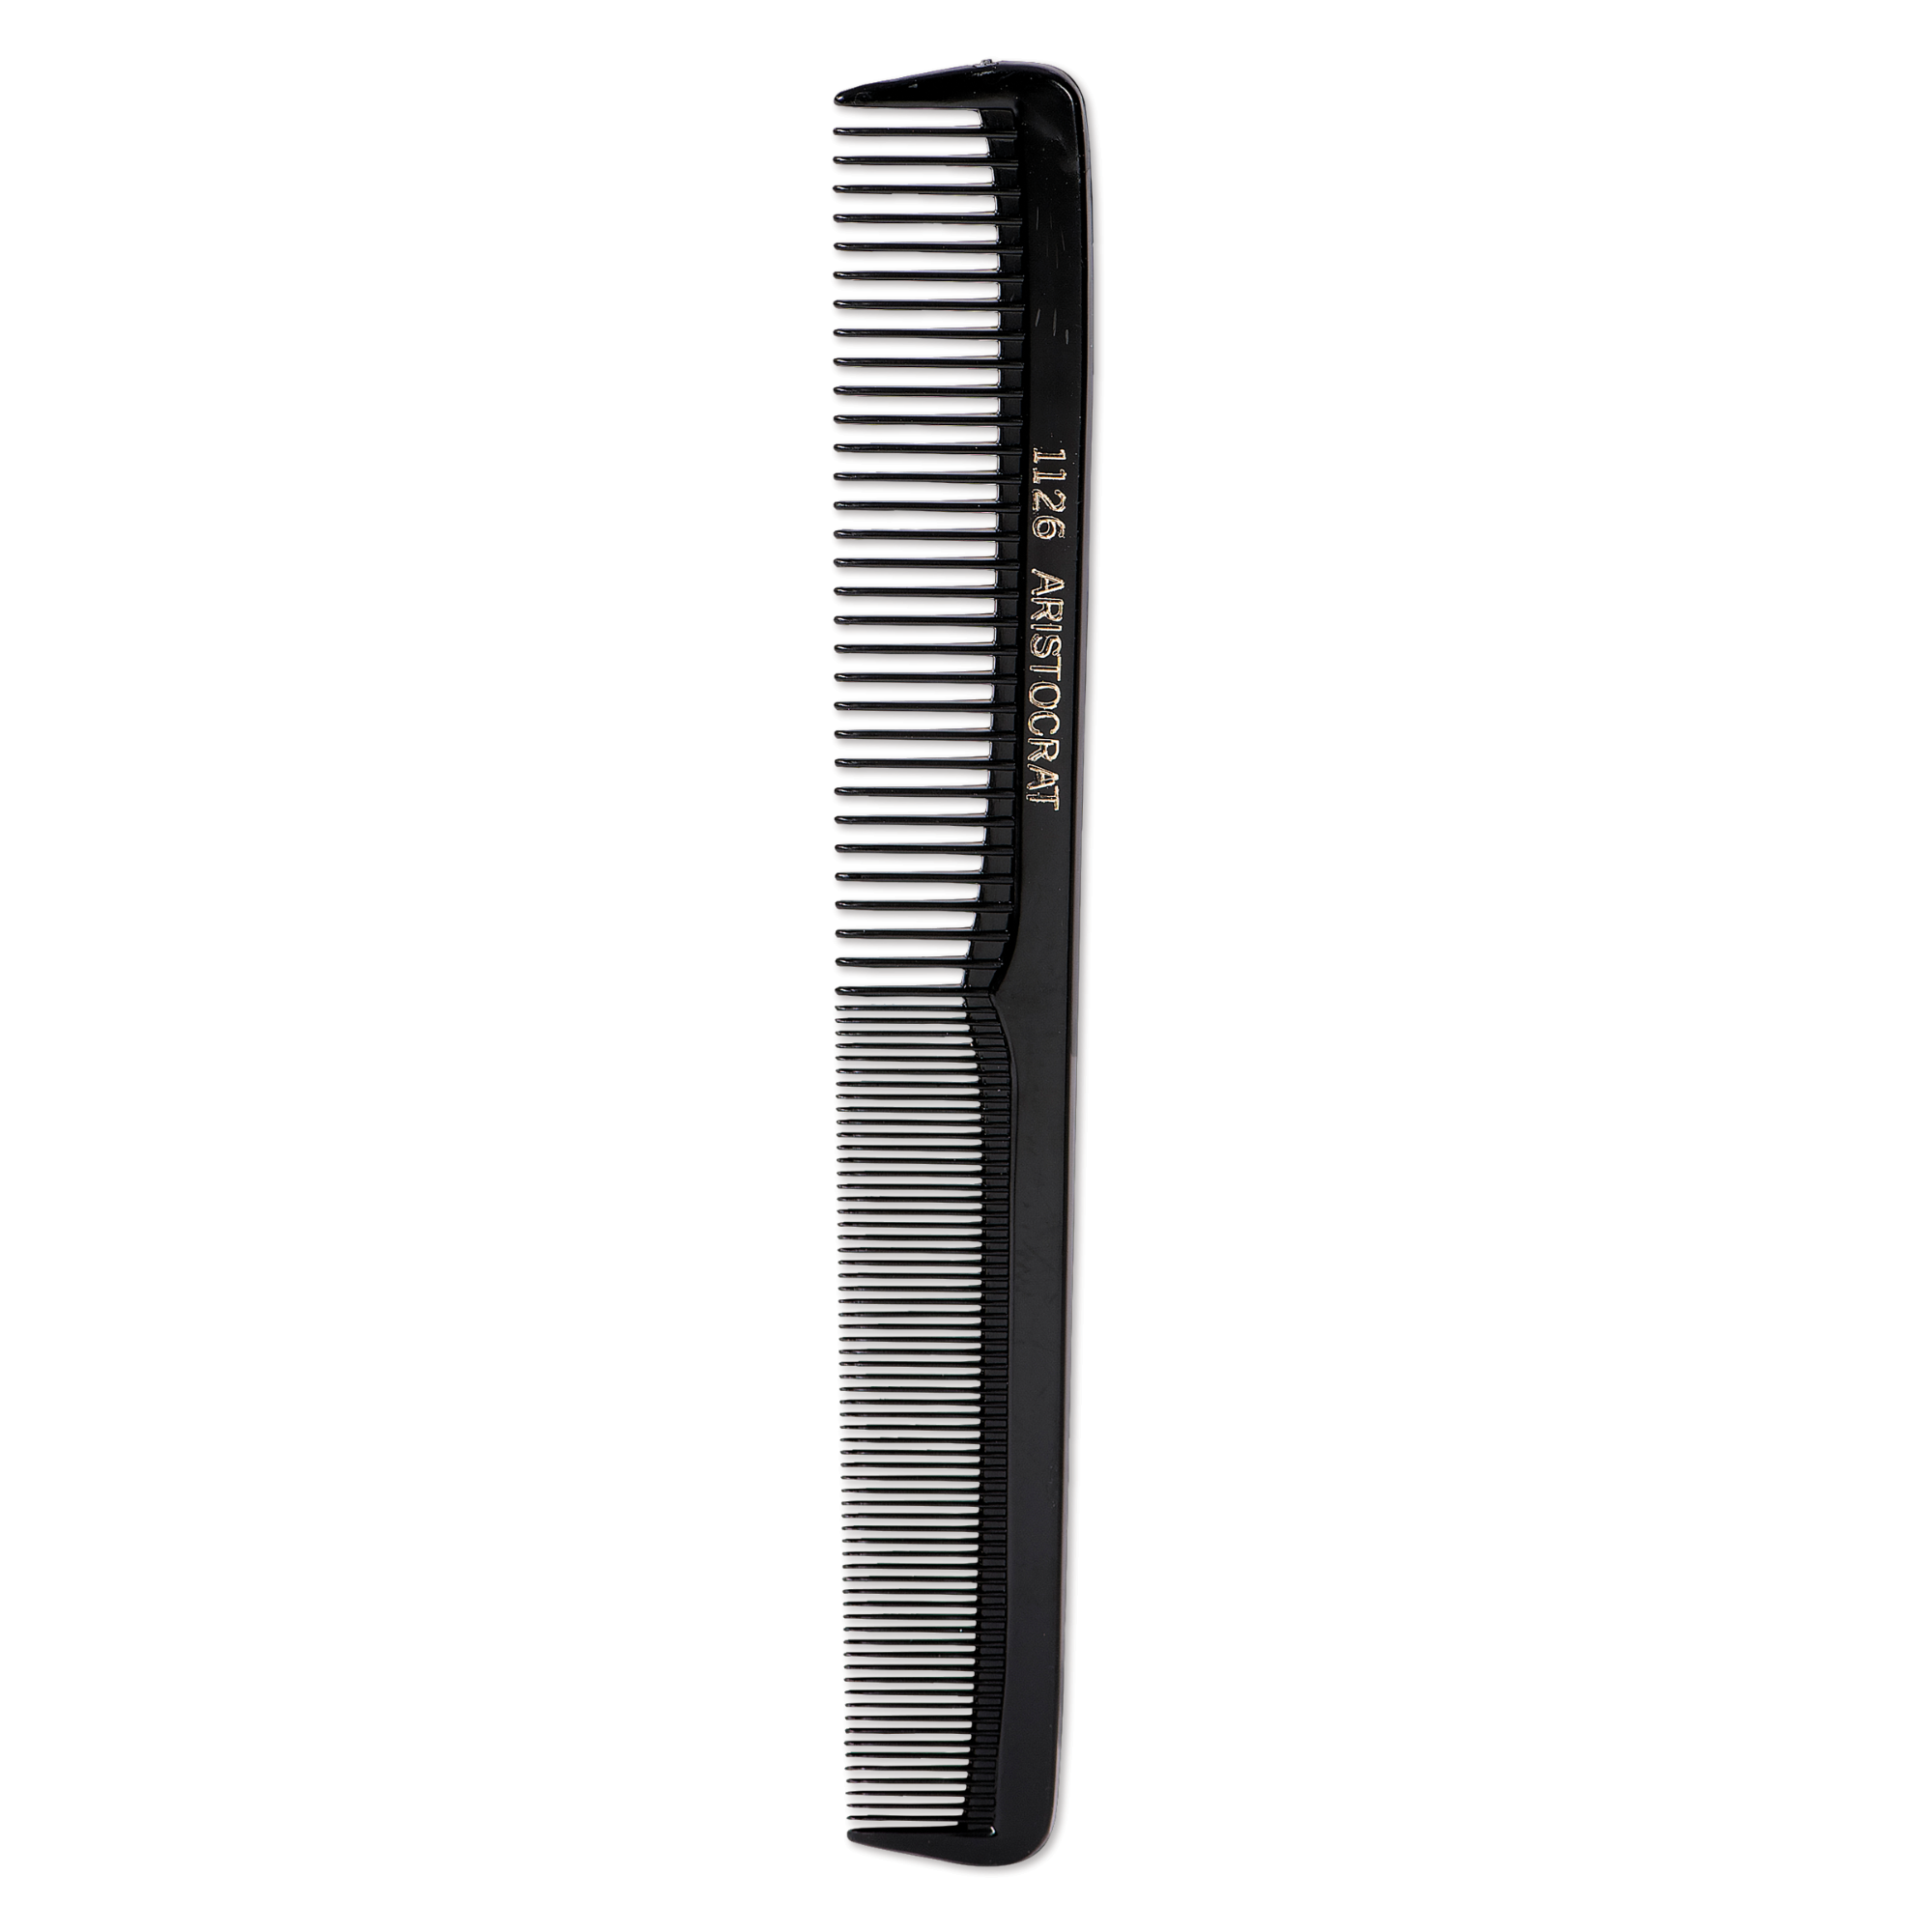 Narrow Styling Comb with Measurement Marks - 7"